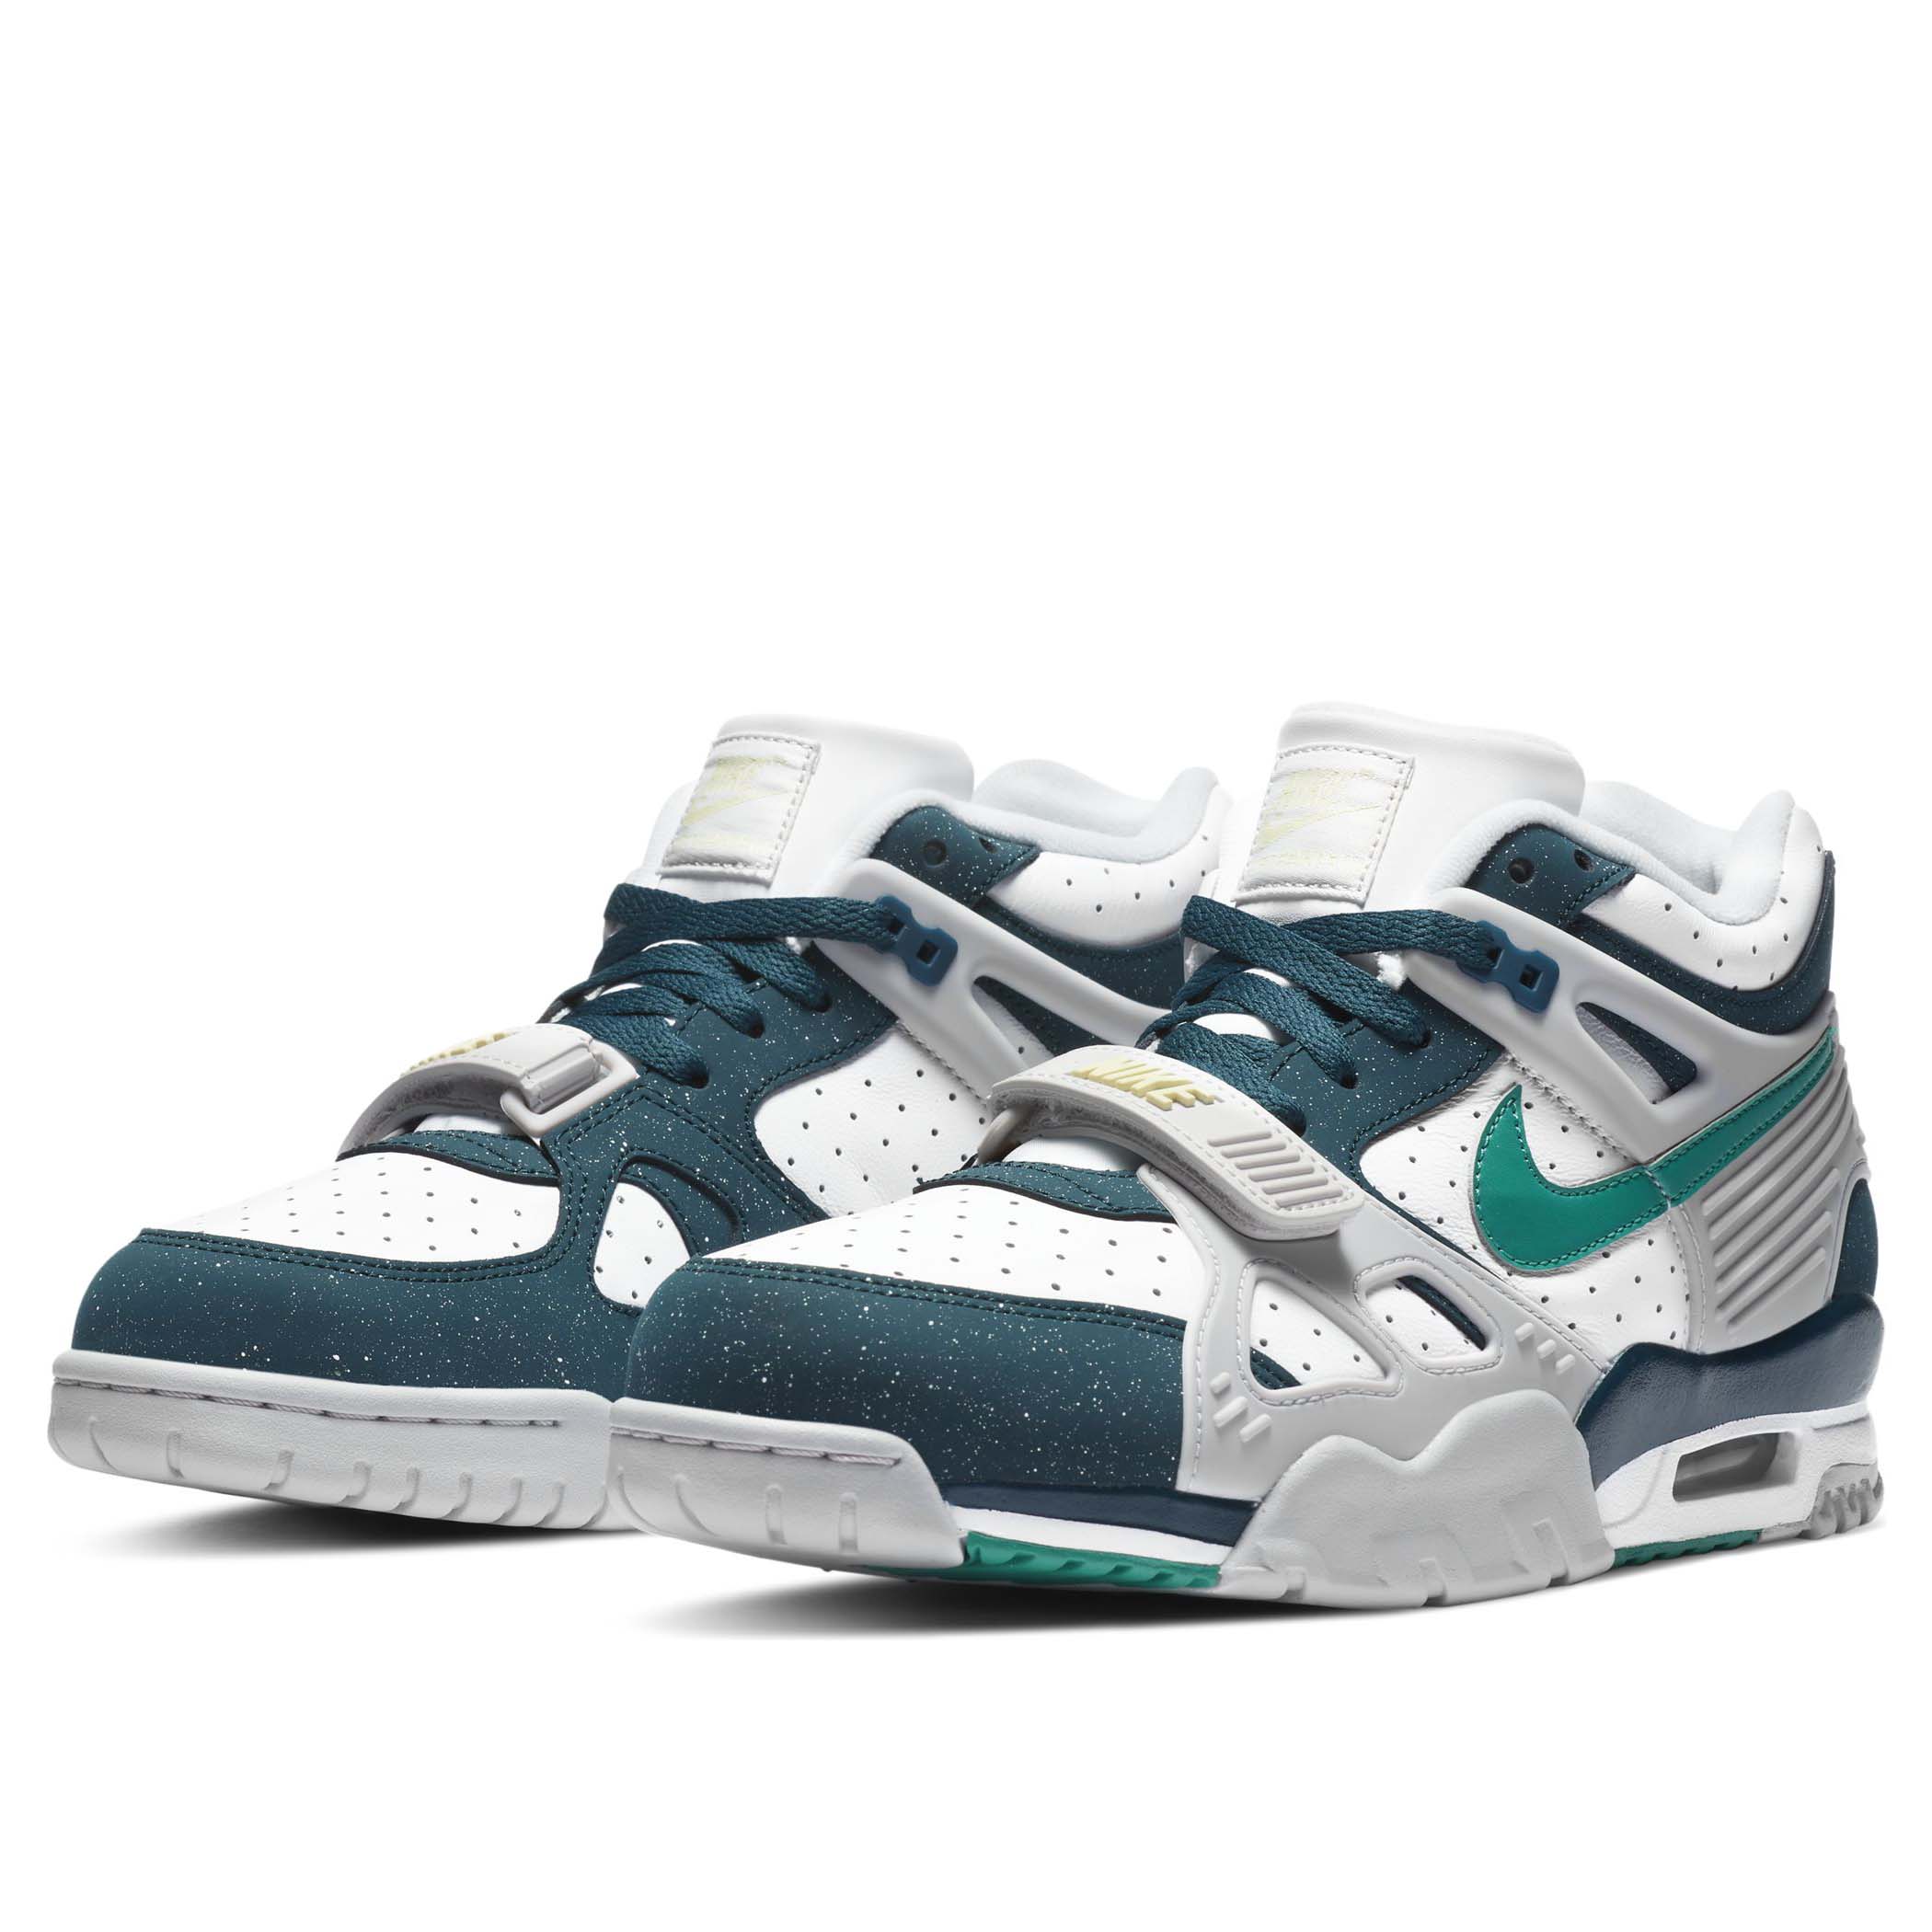 nike air trainer 3 size 13